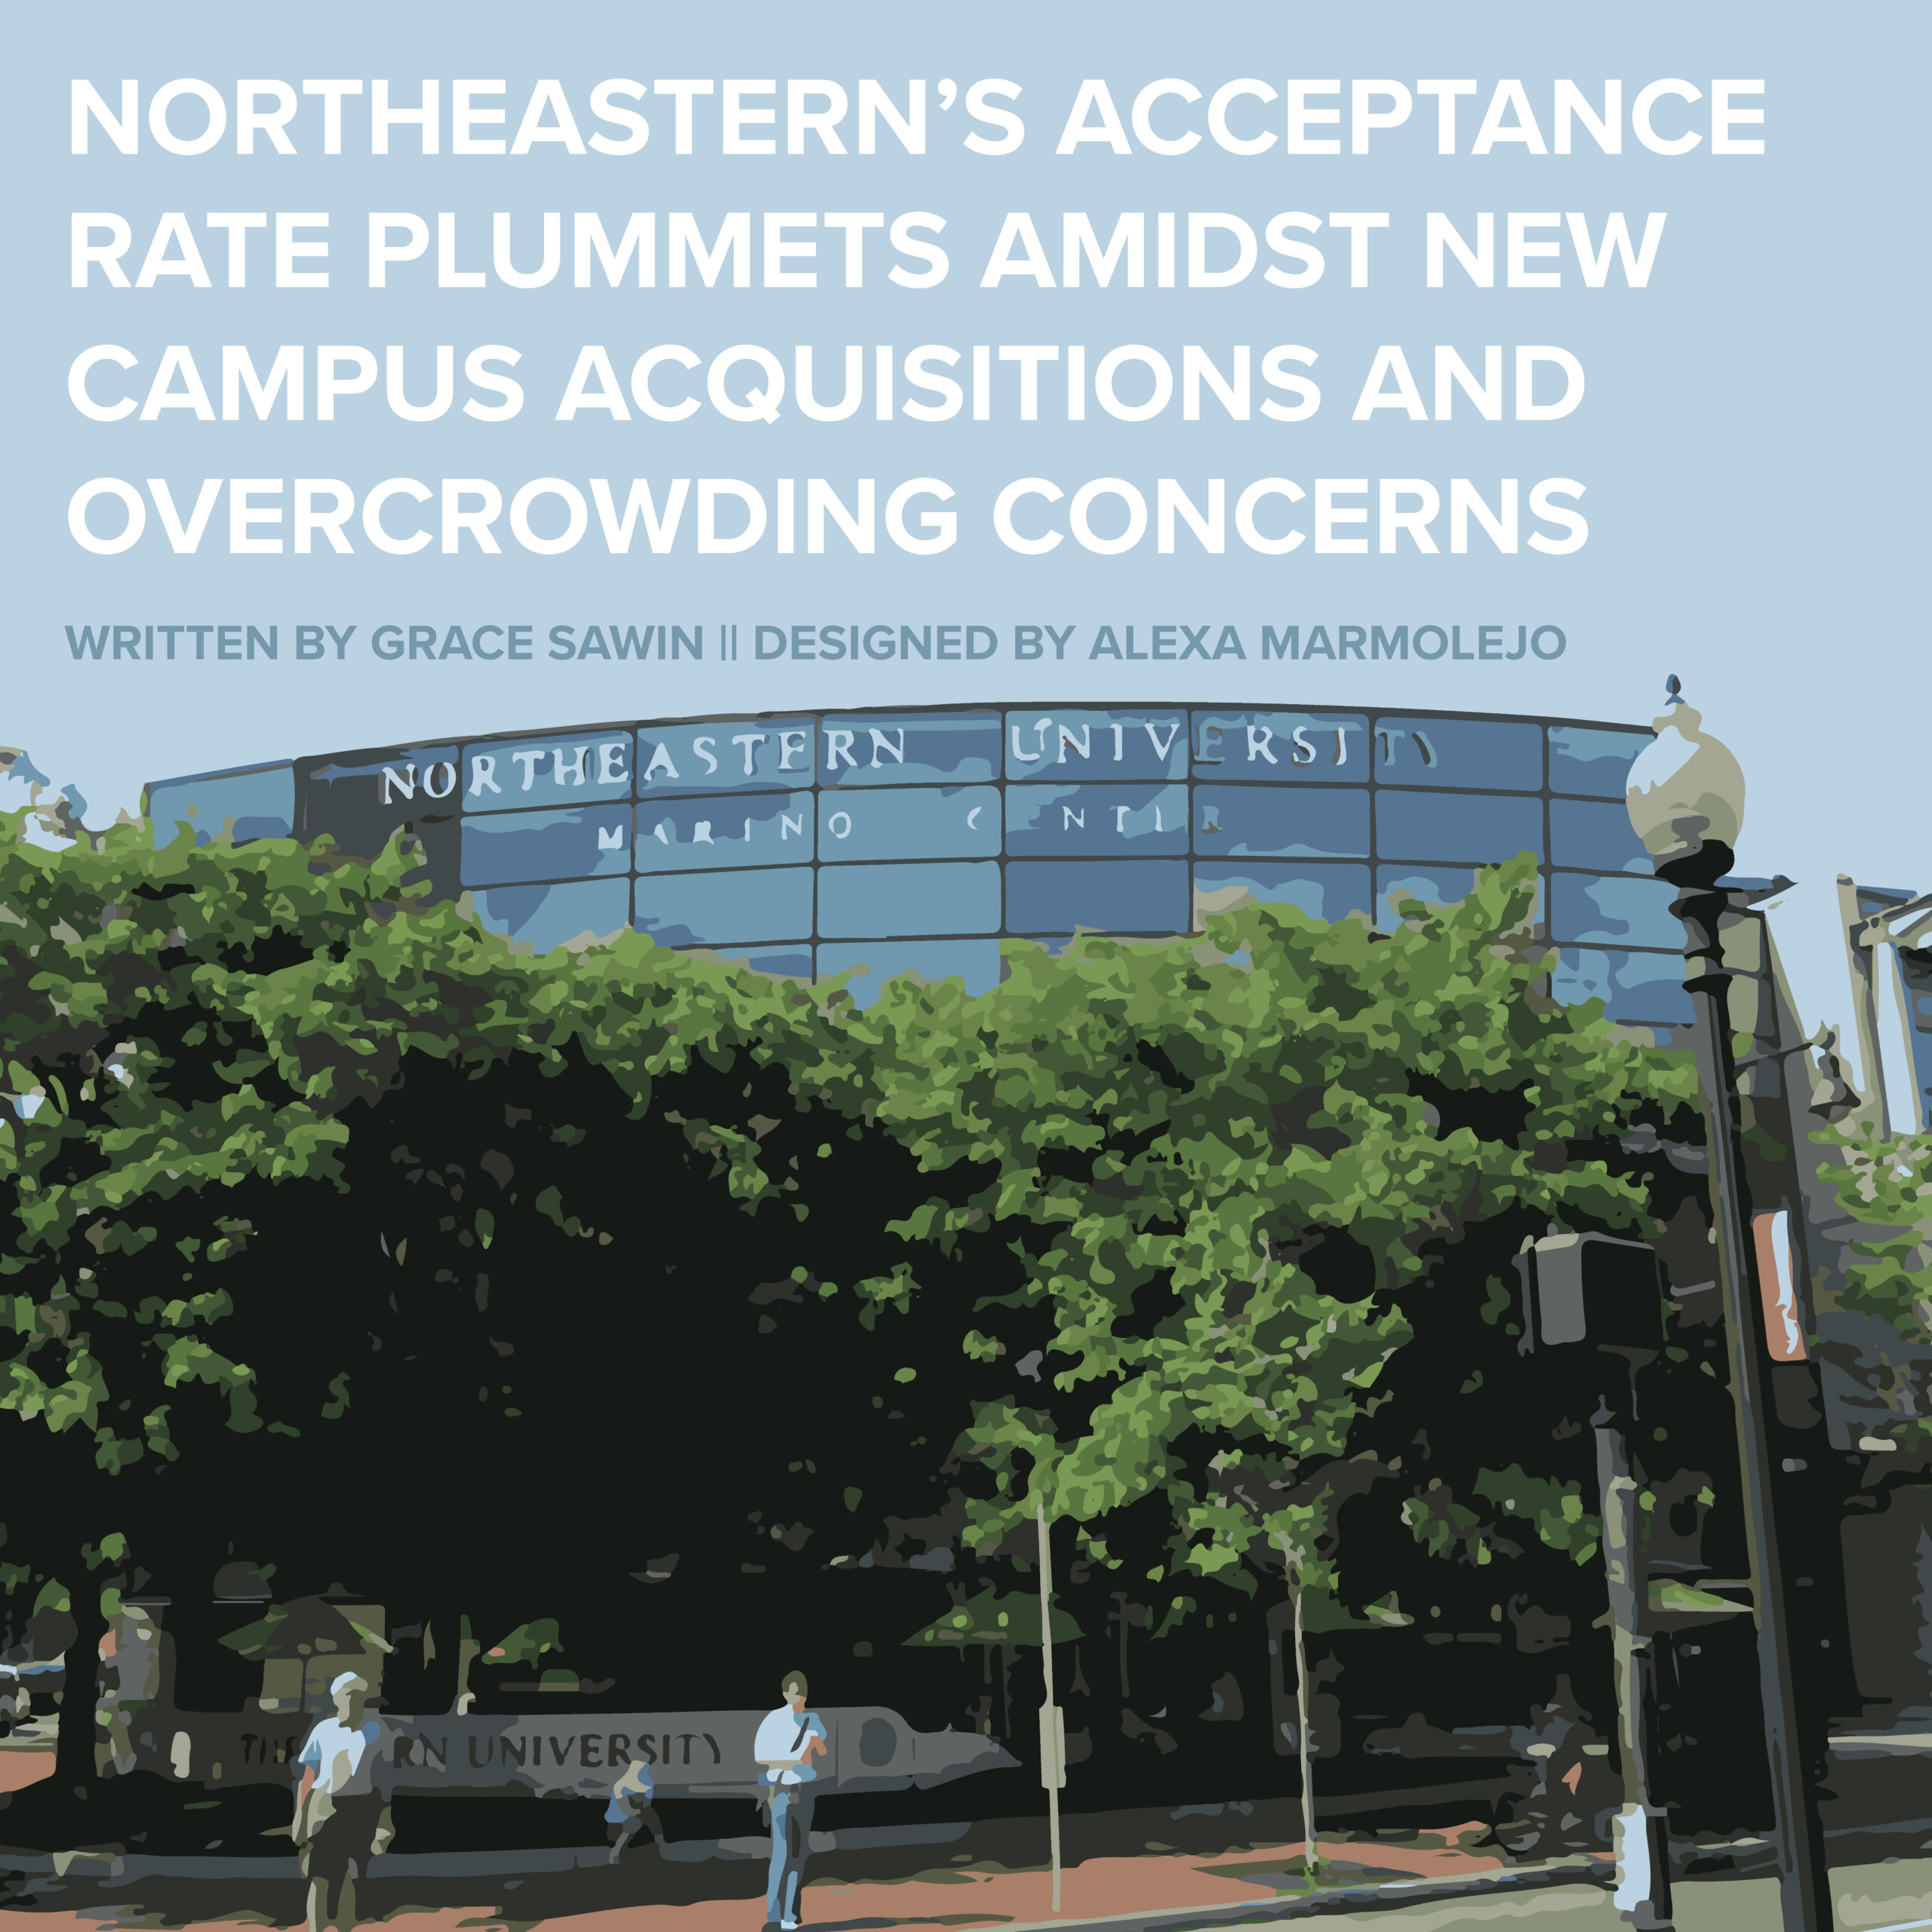 Northeastern’s acceptance rate plummets amidst new campus acquisitions